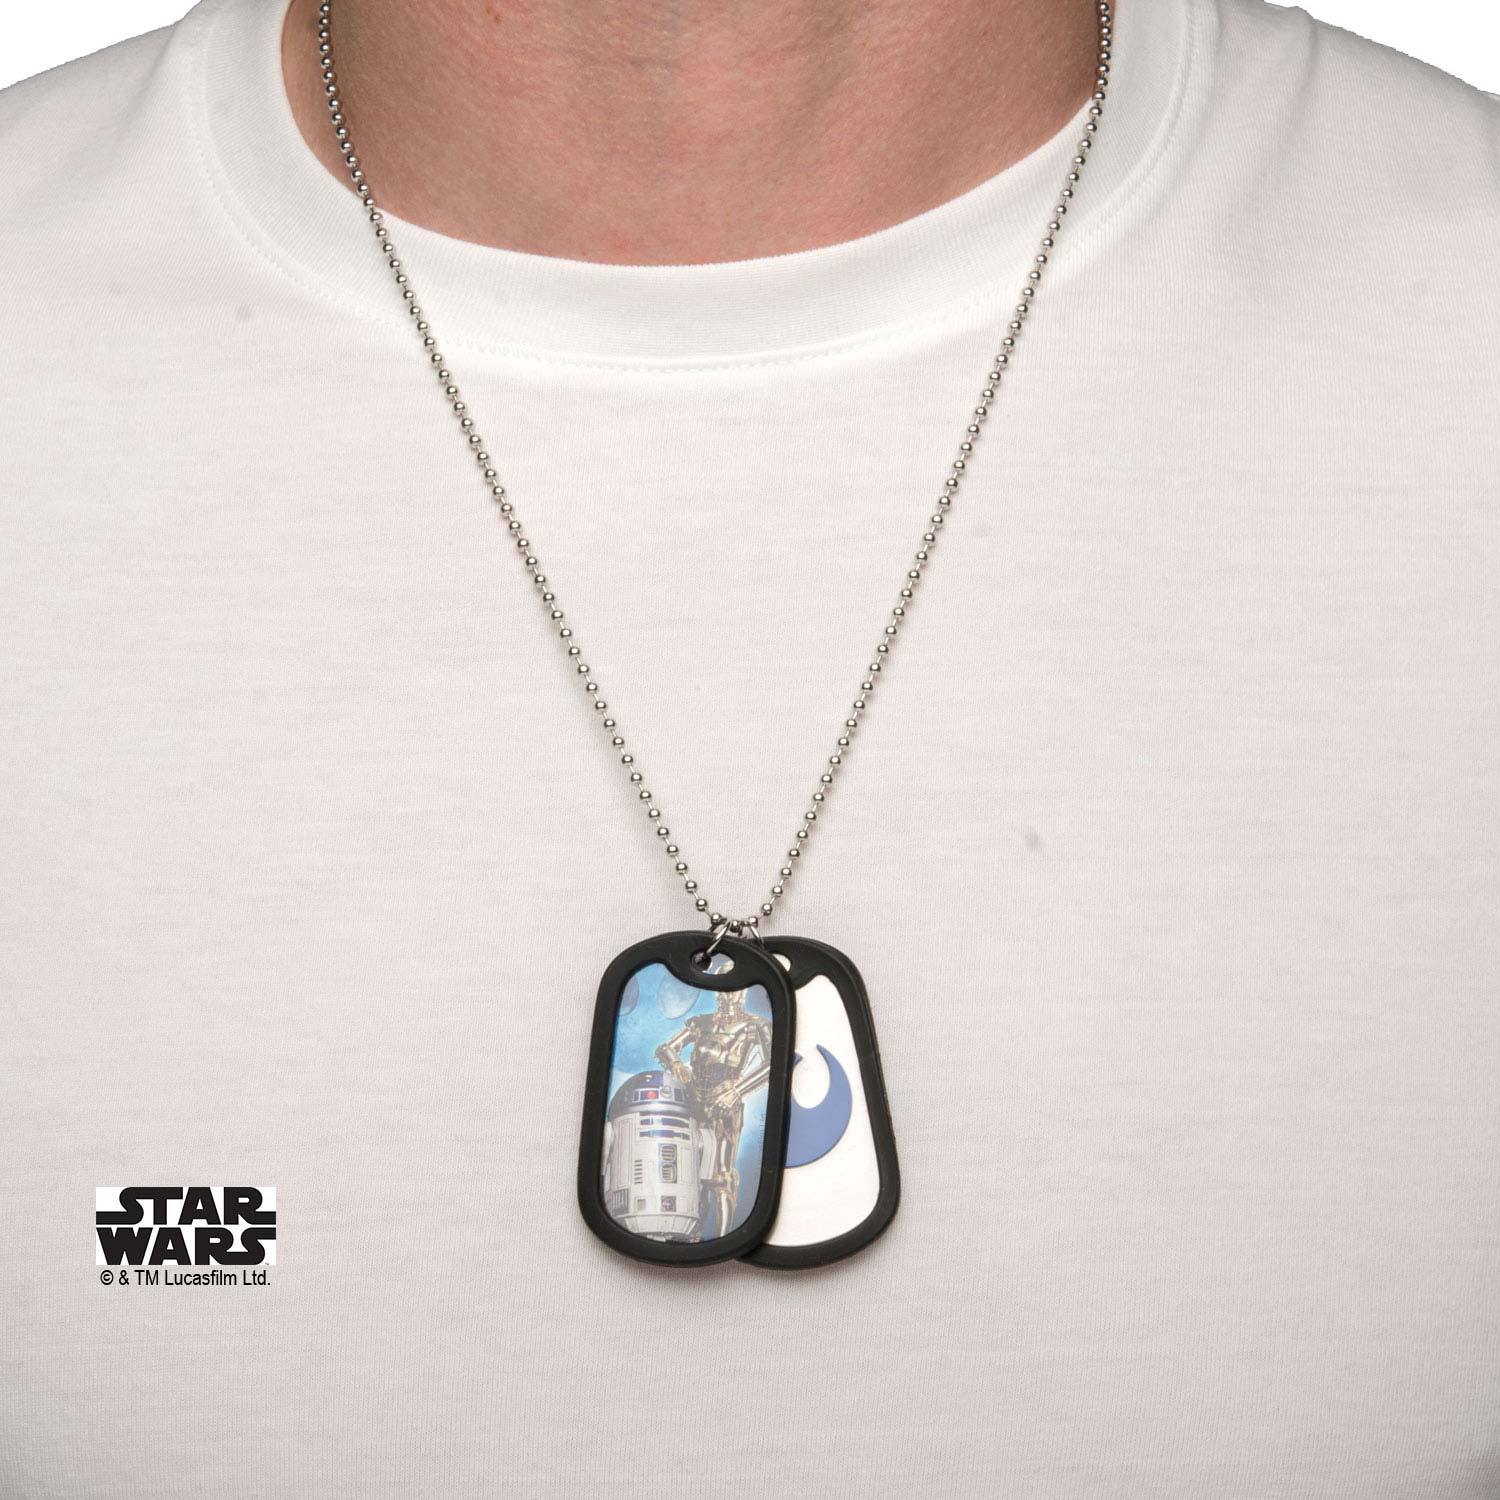 Star Wars R2-D2 & C-3PO Rubber Silencer Double Dog Tag Pendant Necklace